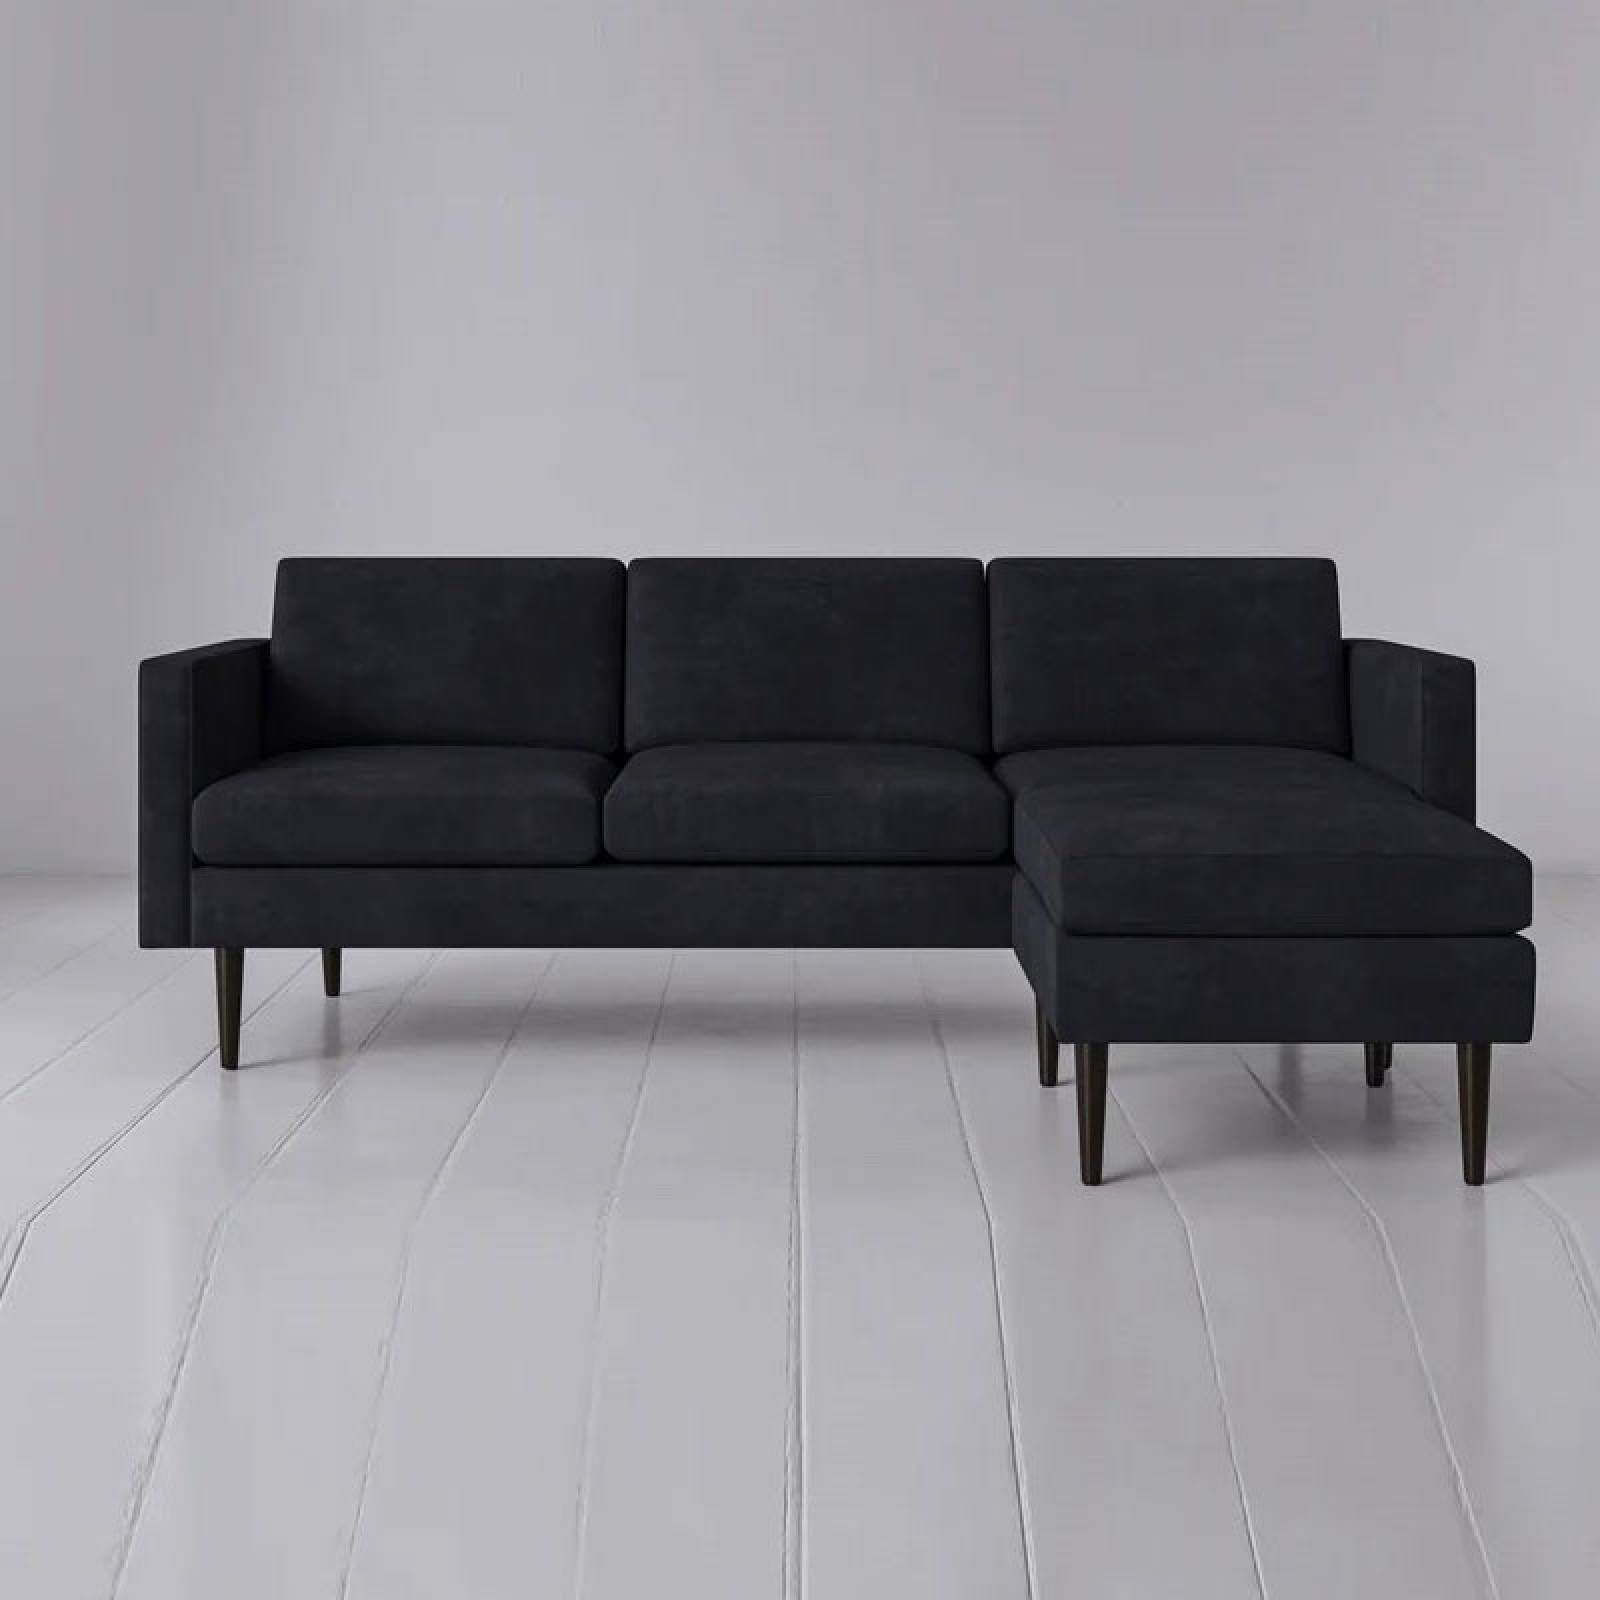 Swyft - Model 01 - 3 Seater Sofa Right Corner Chaise thumbnails